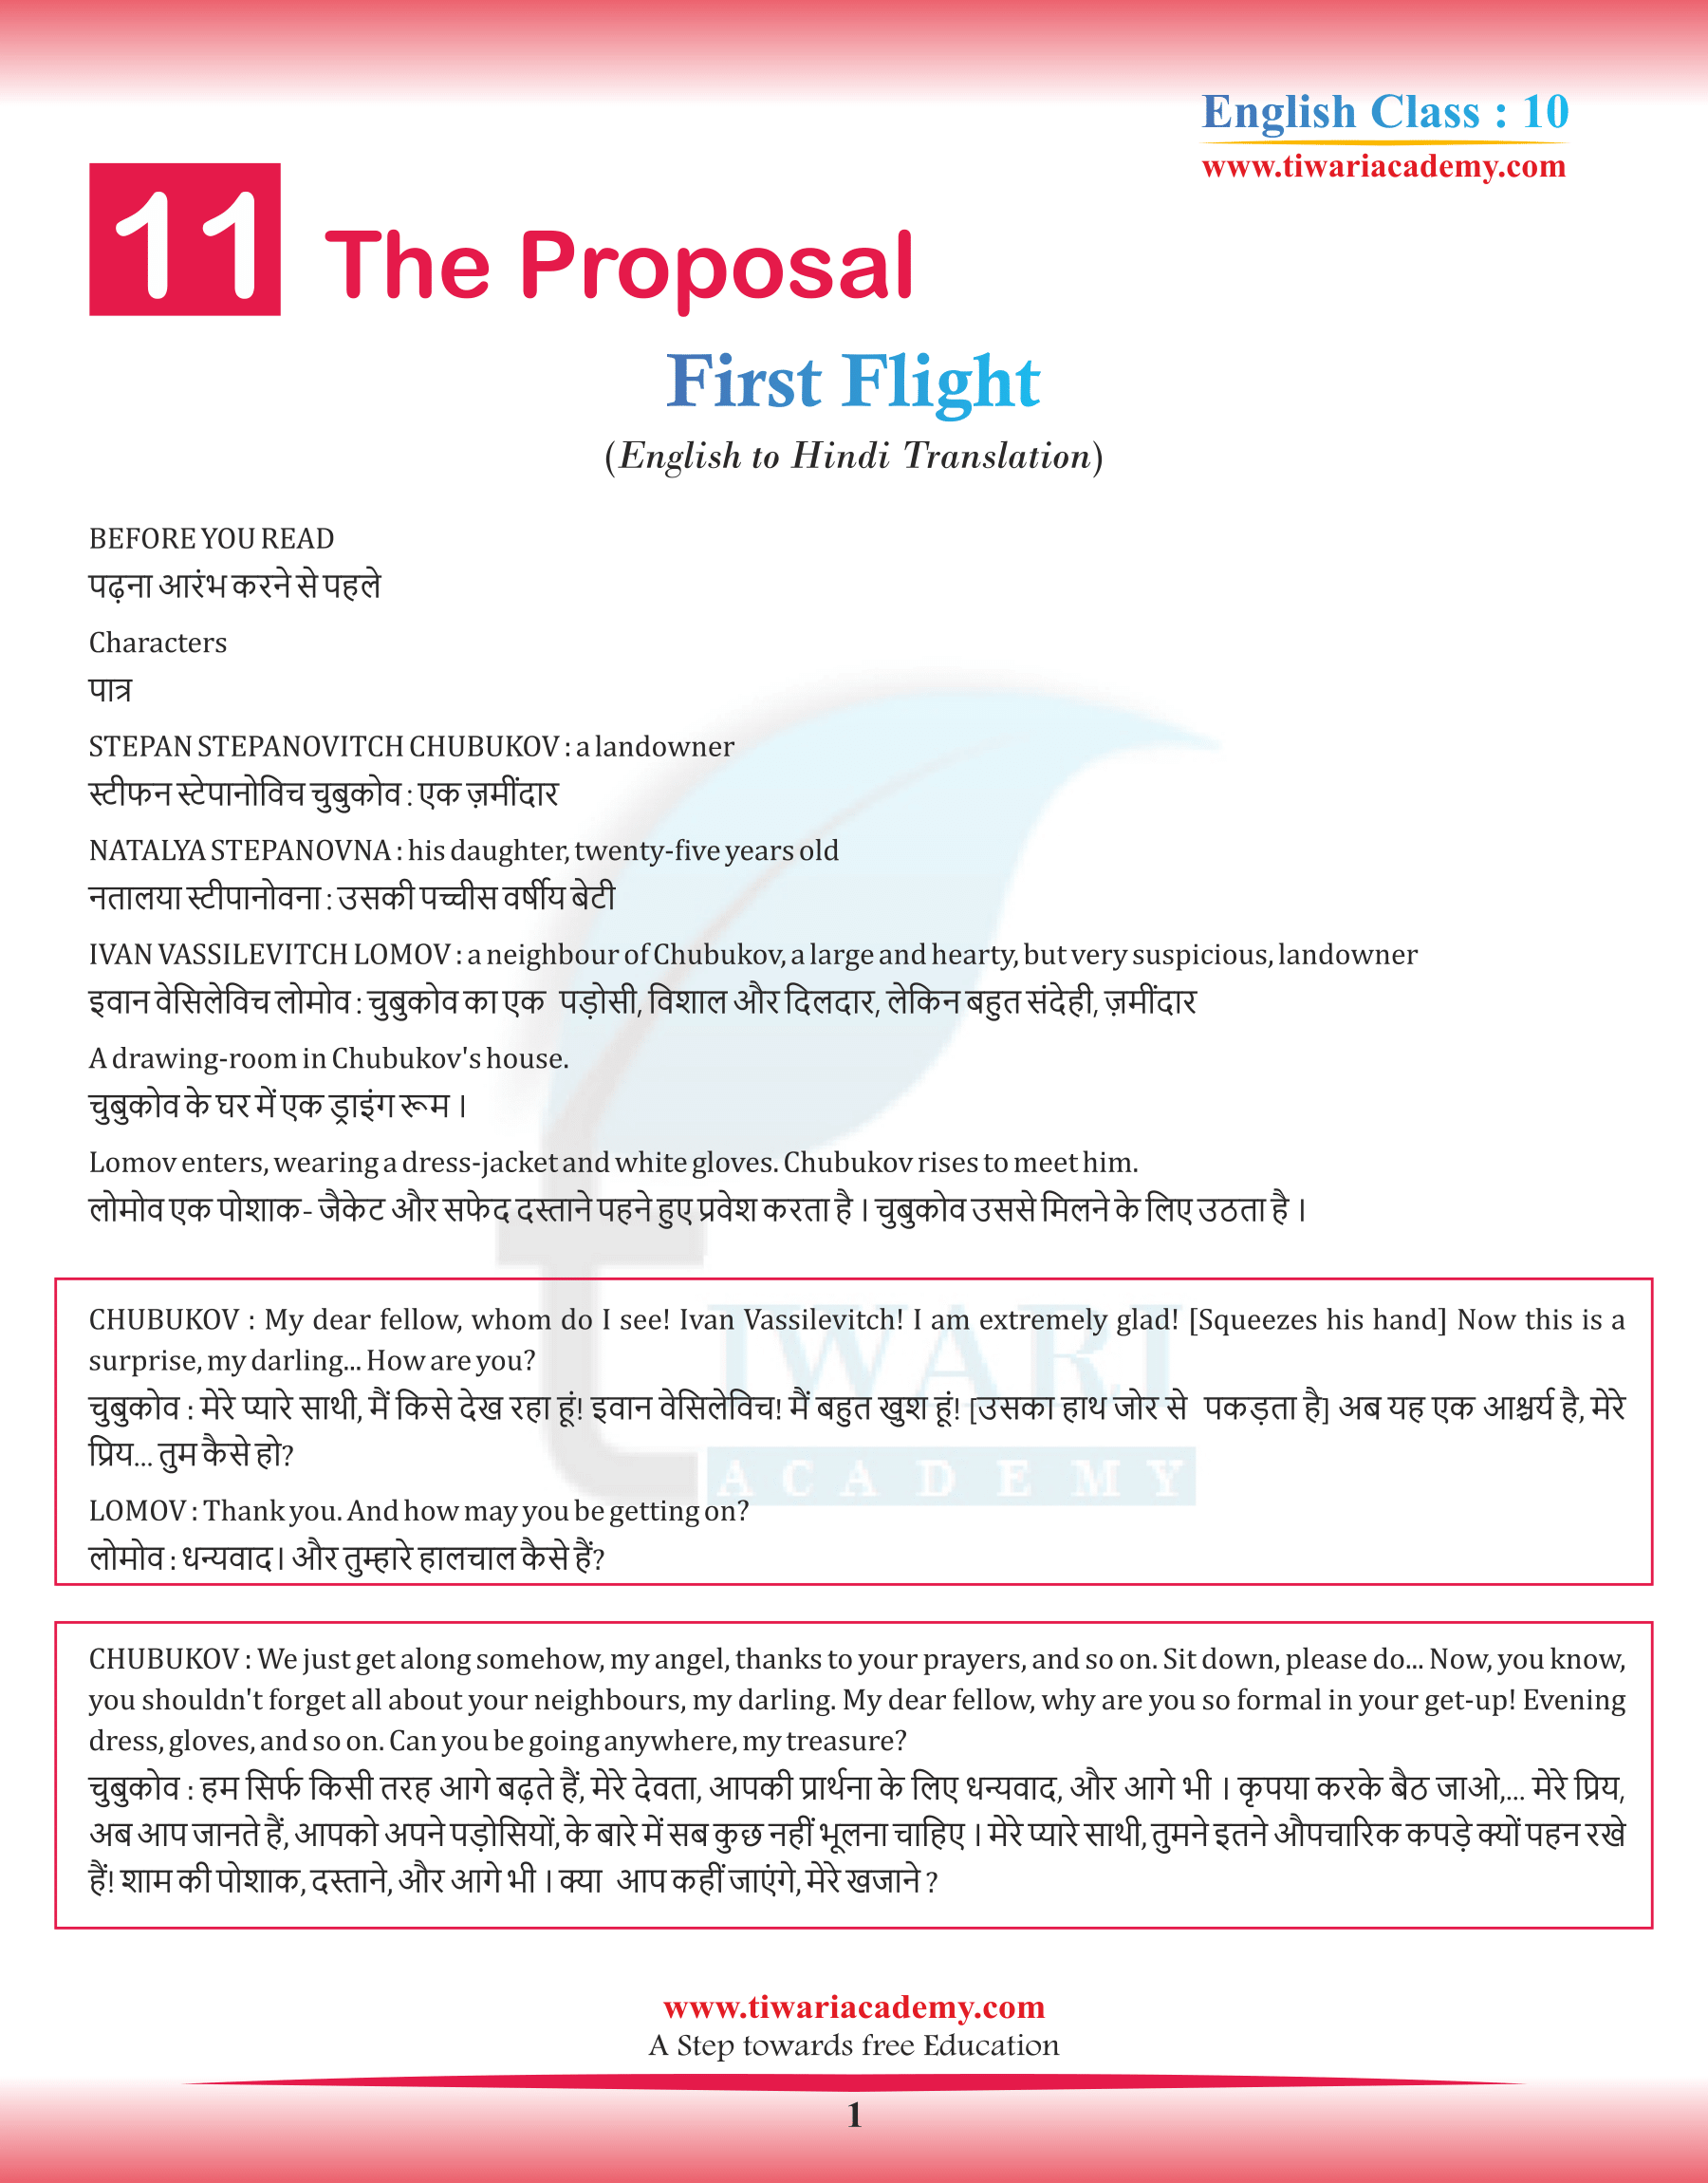 Class 10 English First Flight Chapter 11 The Proposal in Hindi